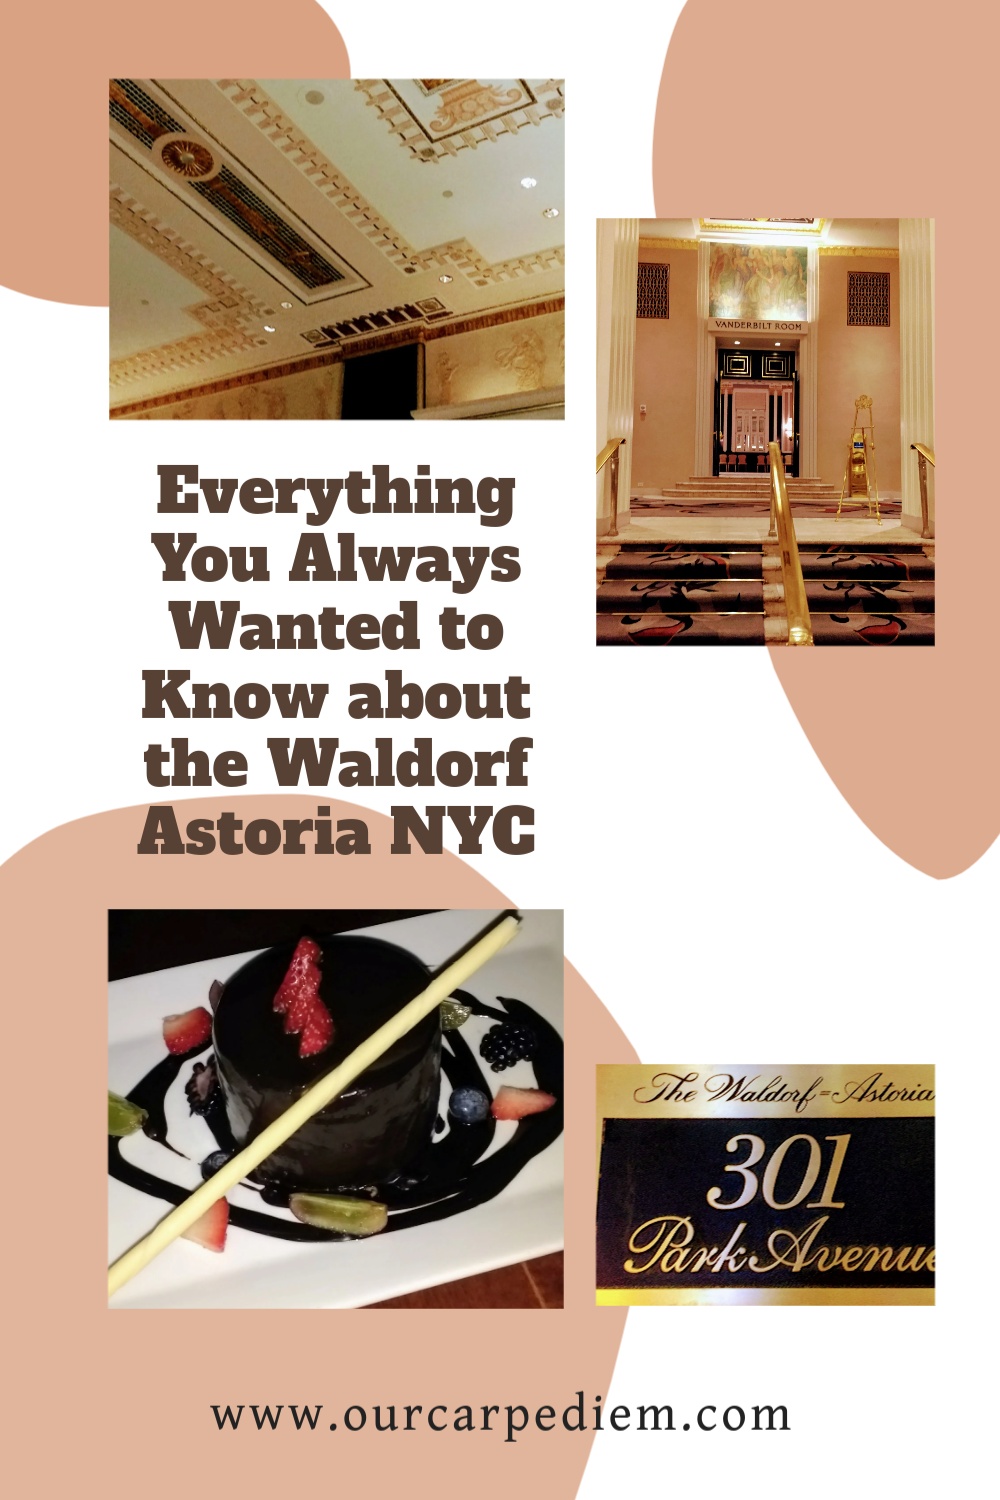 Fascinating history of the Waldorf Astoria New York, a hotel that started with a family feud. Presidents, explorers and more in this iconic hotel! Did you know that this hotel was way ahead of its time in the way it treated women? Where was it located before it moved to Park Avenue? Which famous people have stayed here?